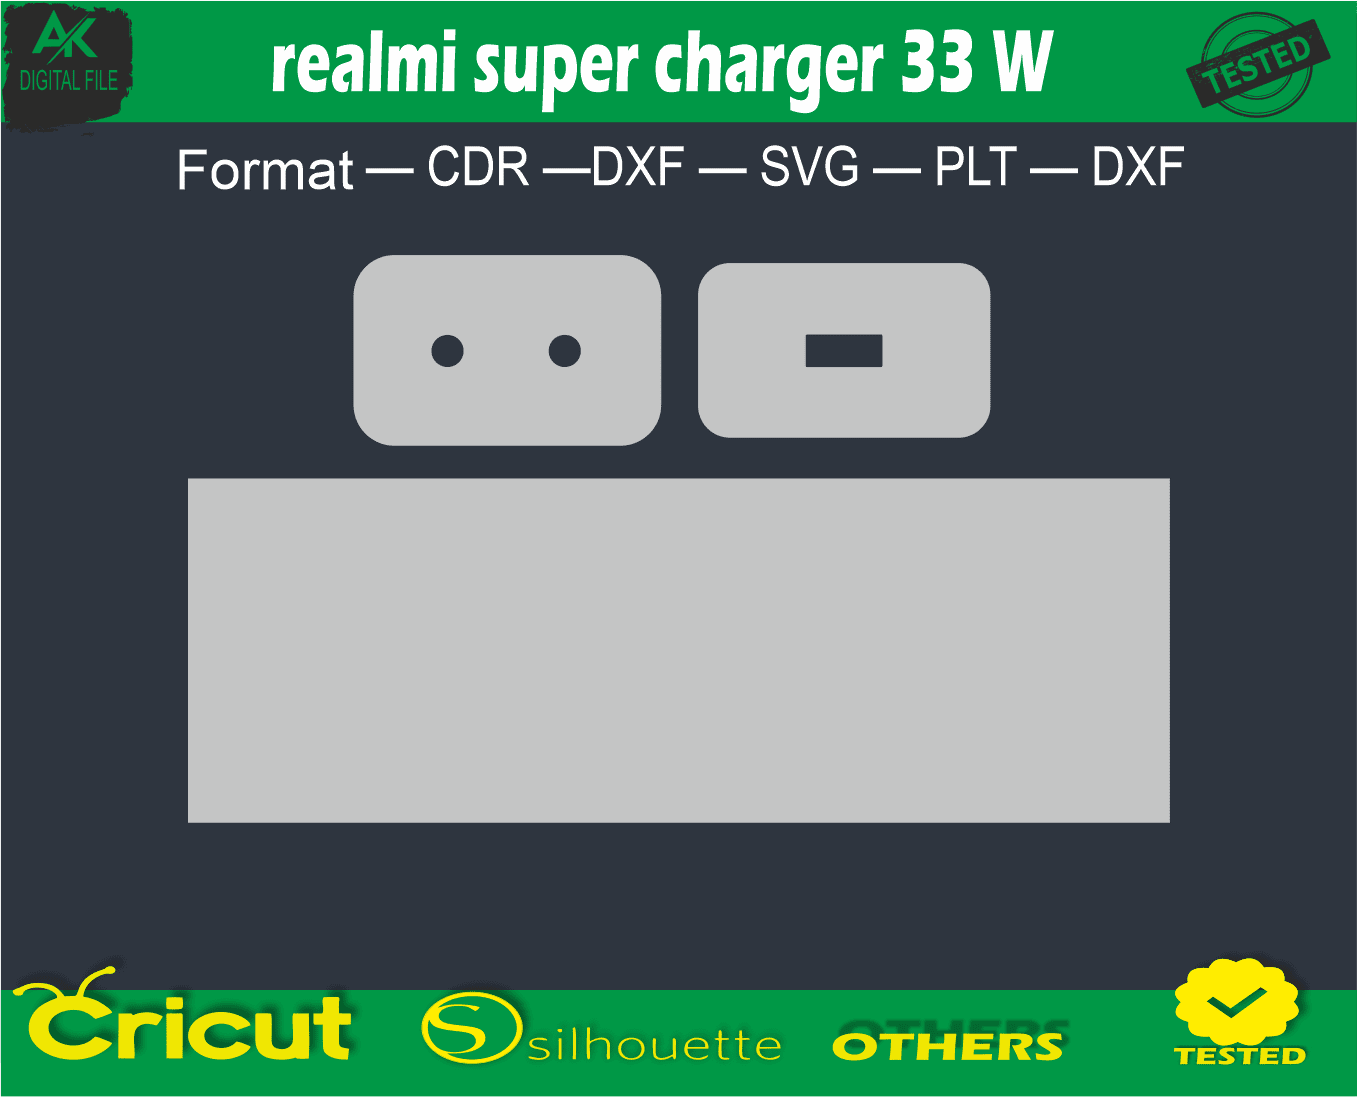 realmi super charger 33 W